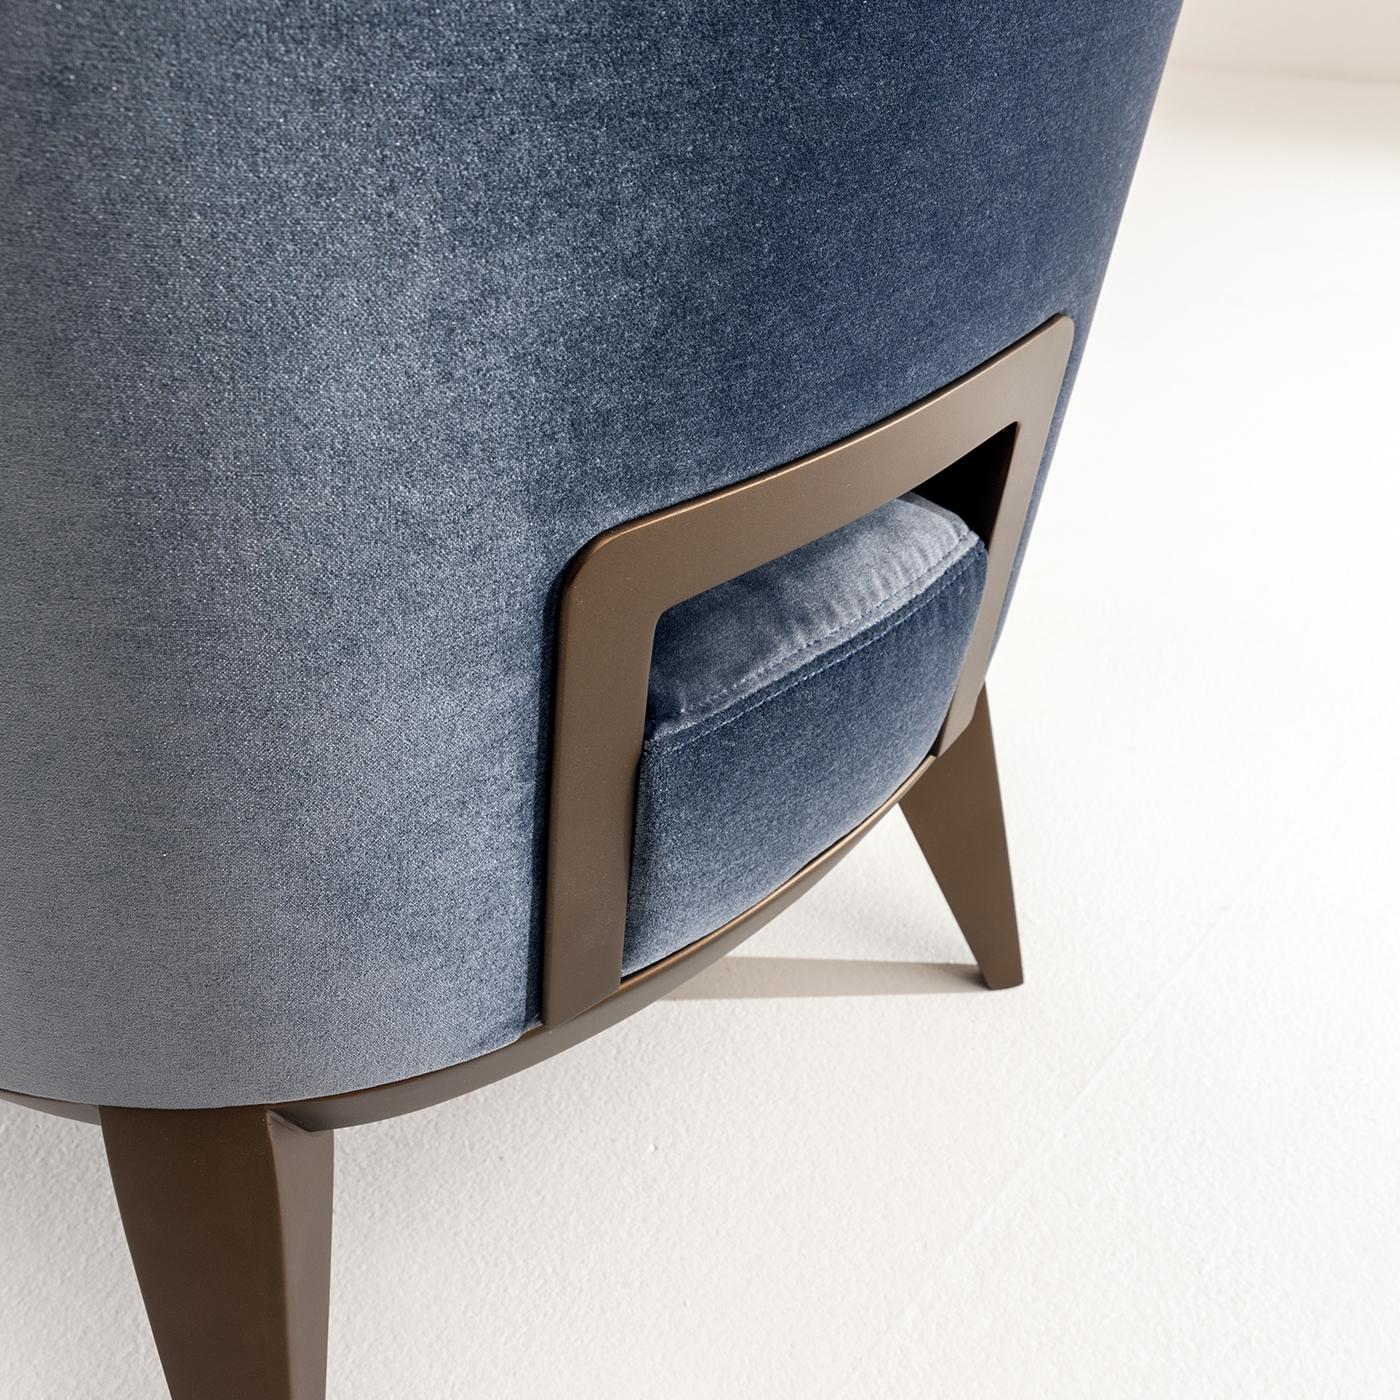 Featuring a distinctive handle carved in the back, the Margaret Armchair by Cesare Arosio has a natural wood structure, which may be lacquered and is padded and upholstered in leather, fabric or velvet. Extremely comfortable, the integrated handle